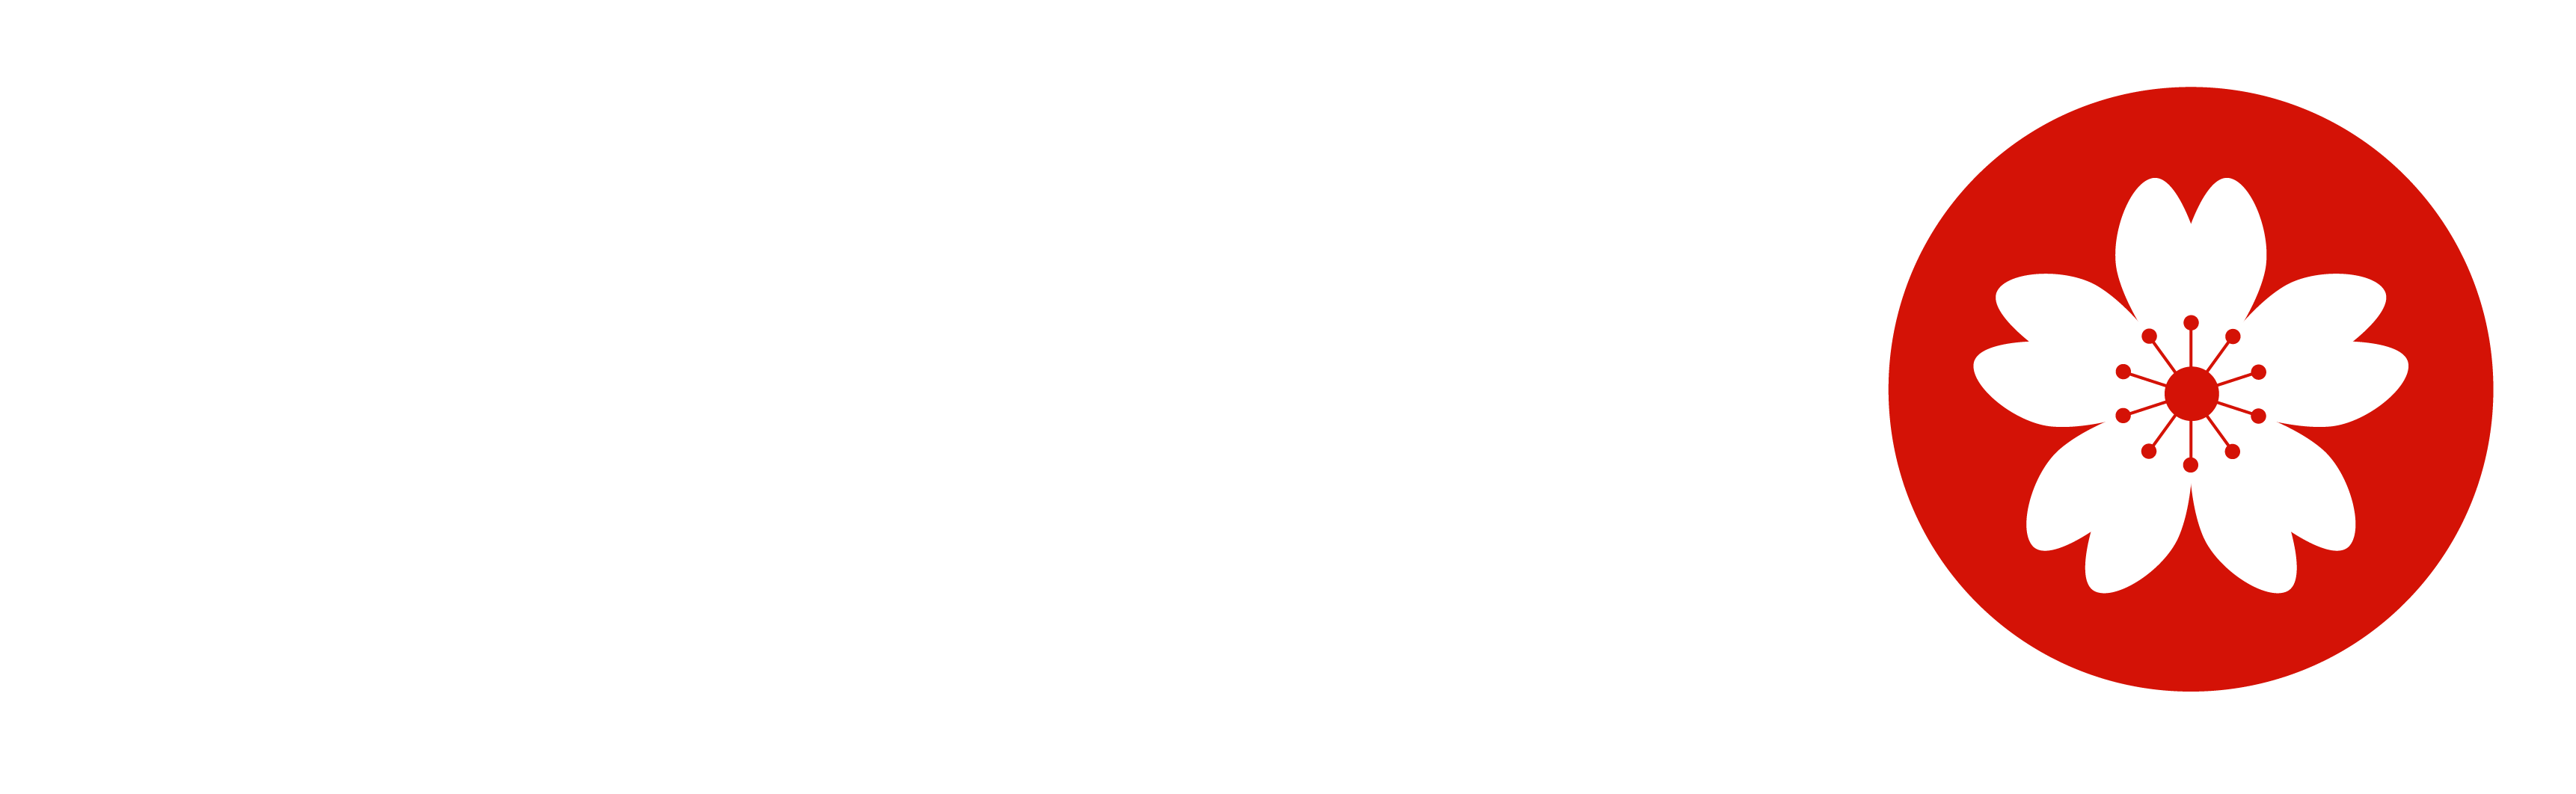 The Games Room - Harucon 2019